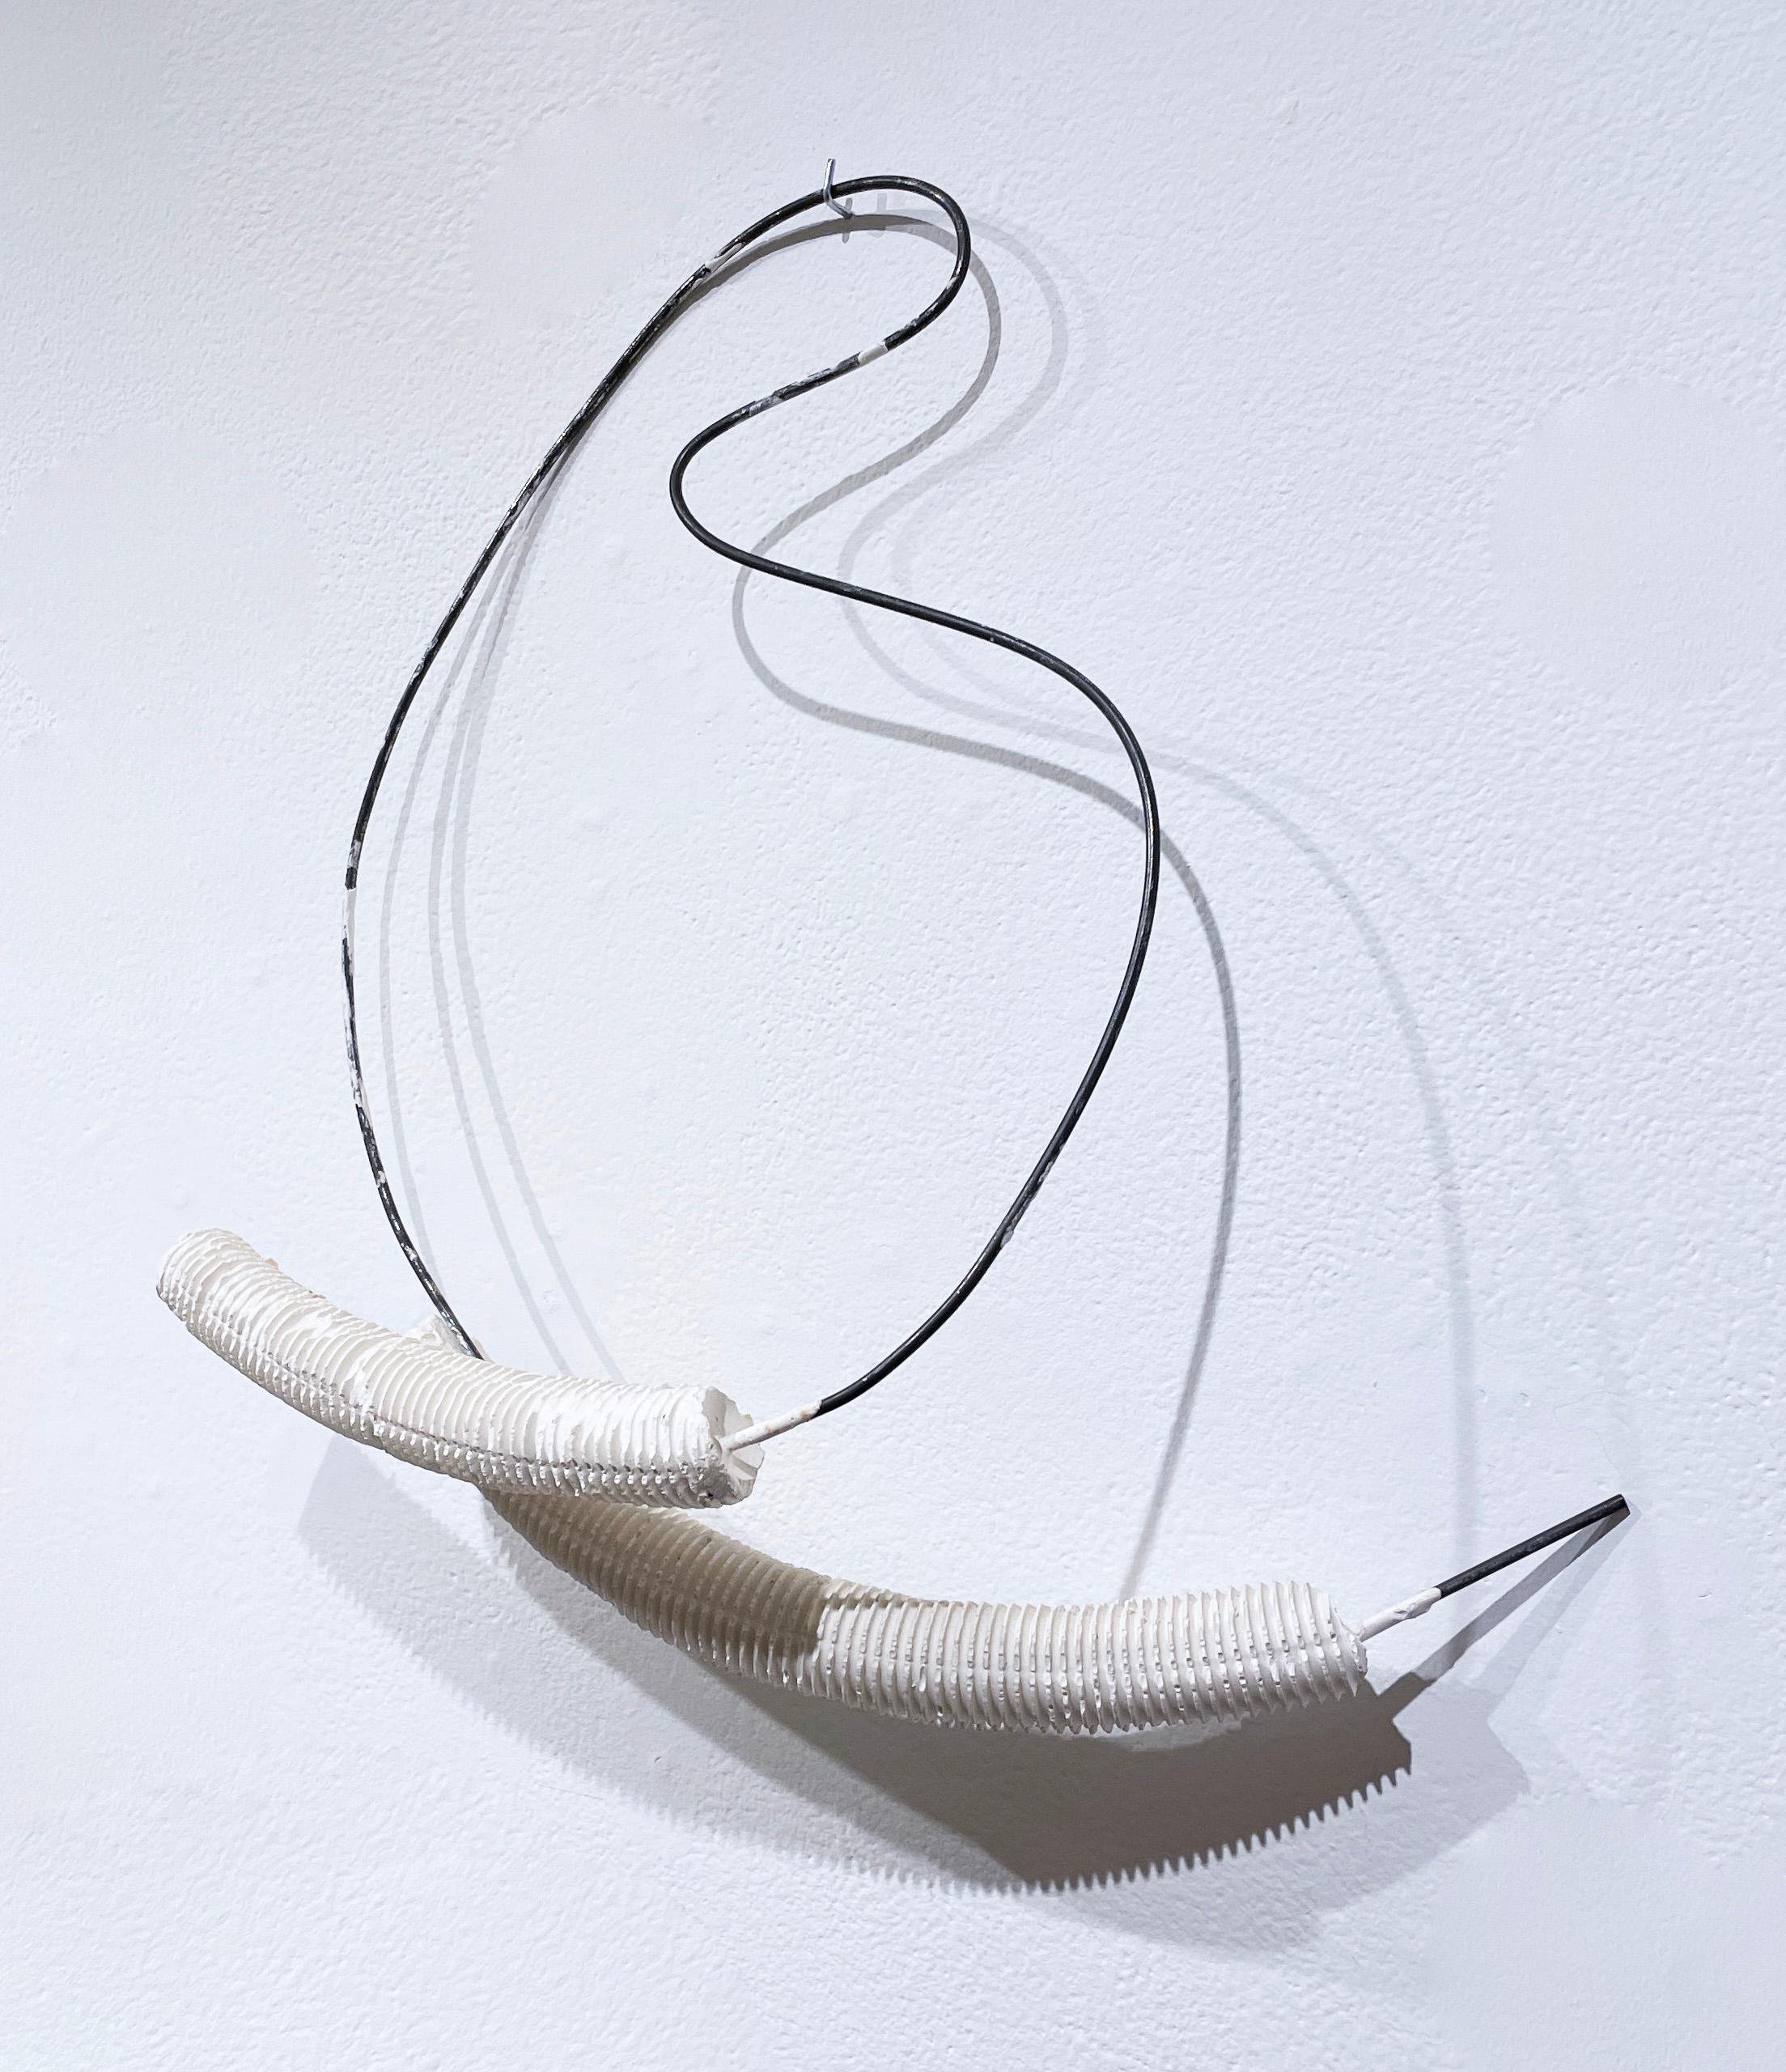 Wire Form with Crossed Legs (2021), white hydrocal abstract sculpture, metal - Sculpture by Dena Paige Fischer